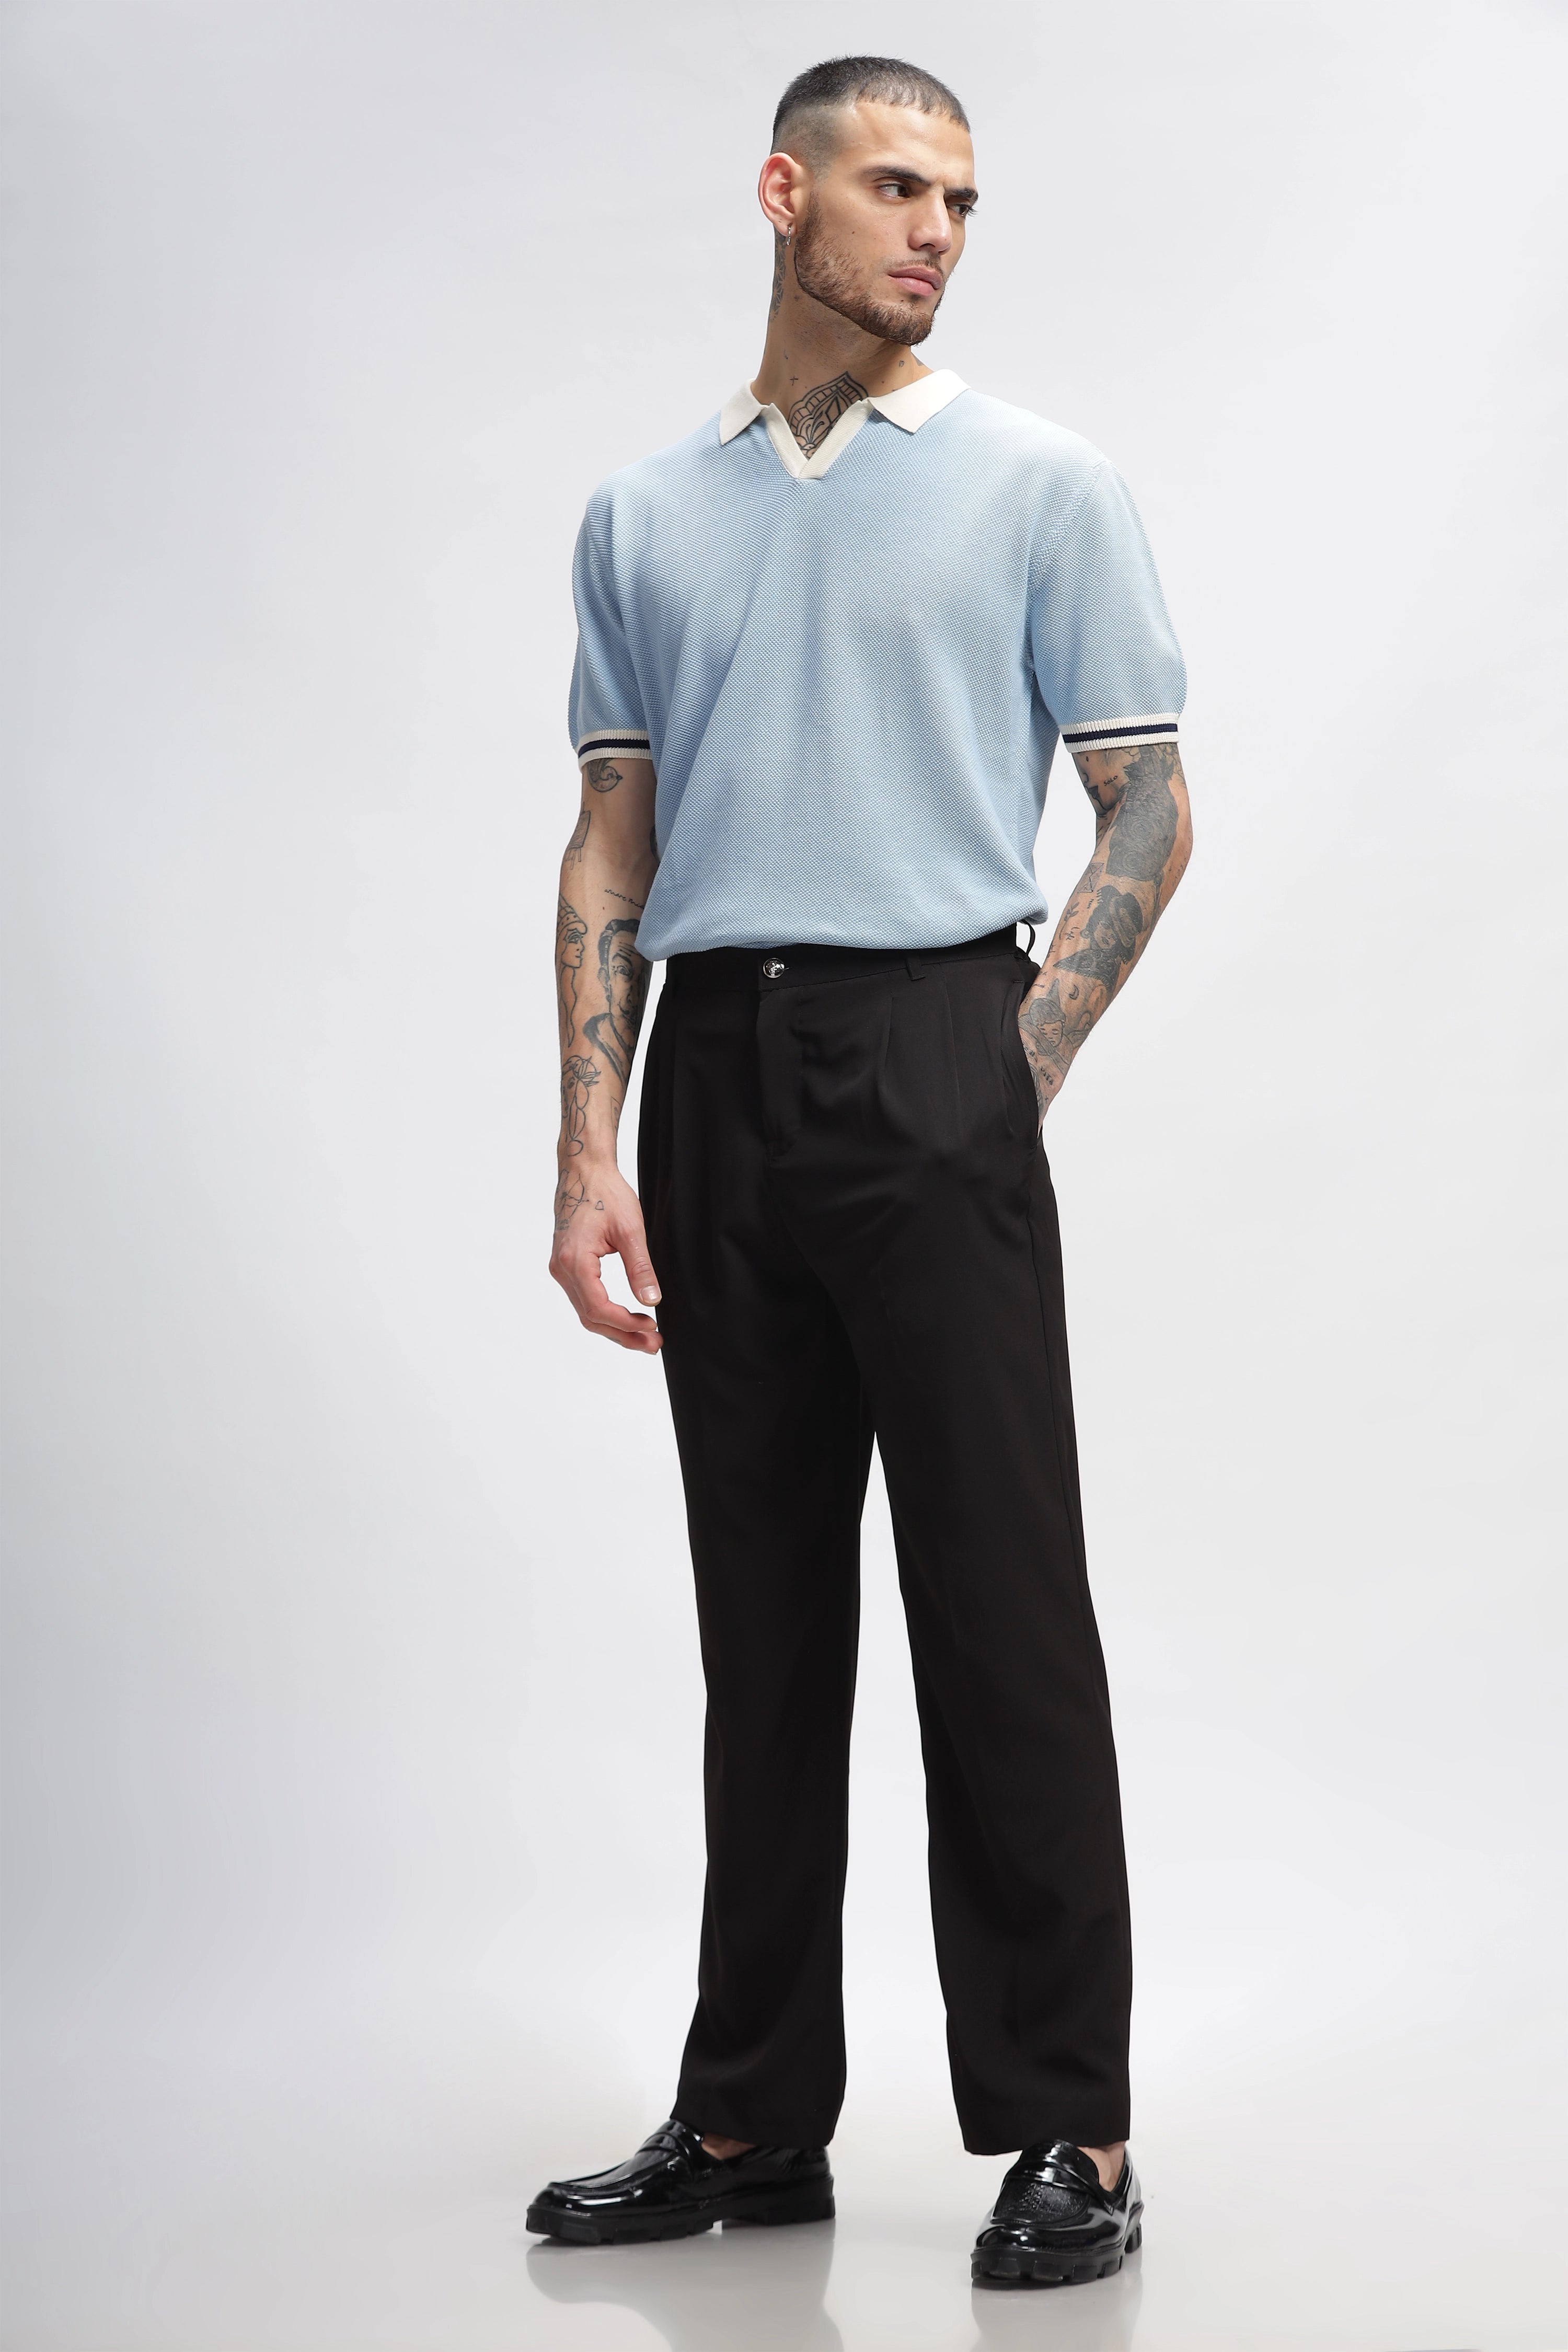 Baby Blue Contrast Tipping Polos